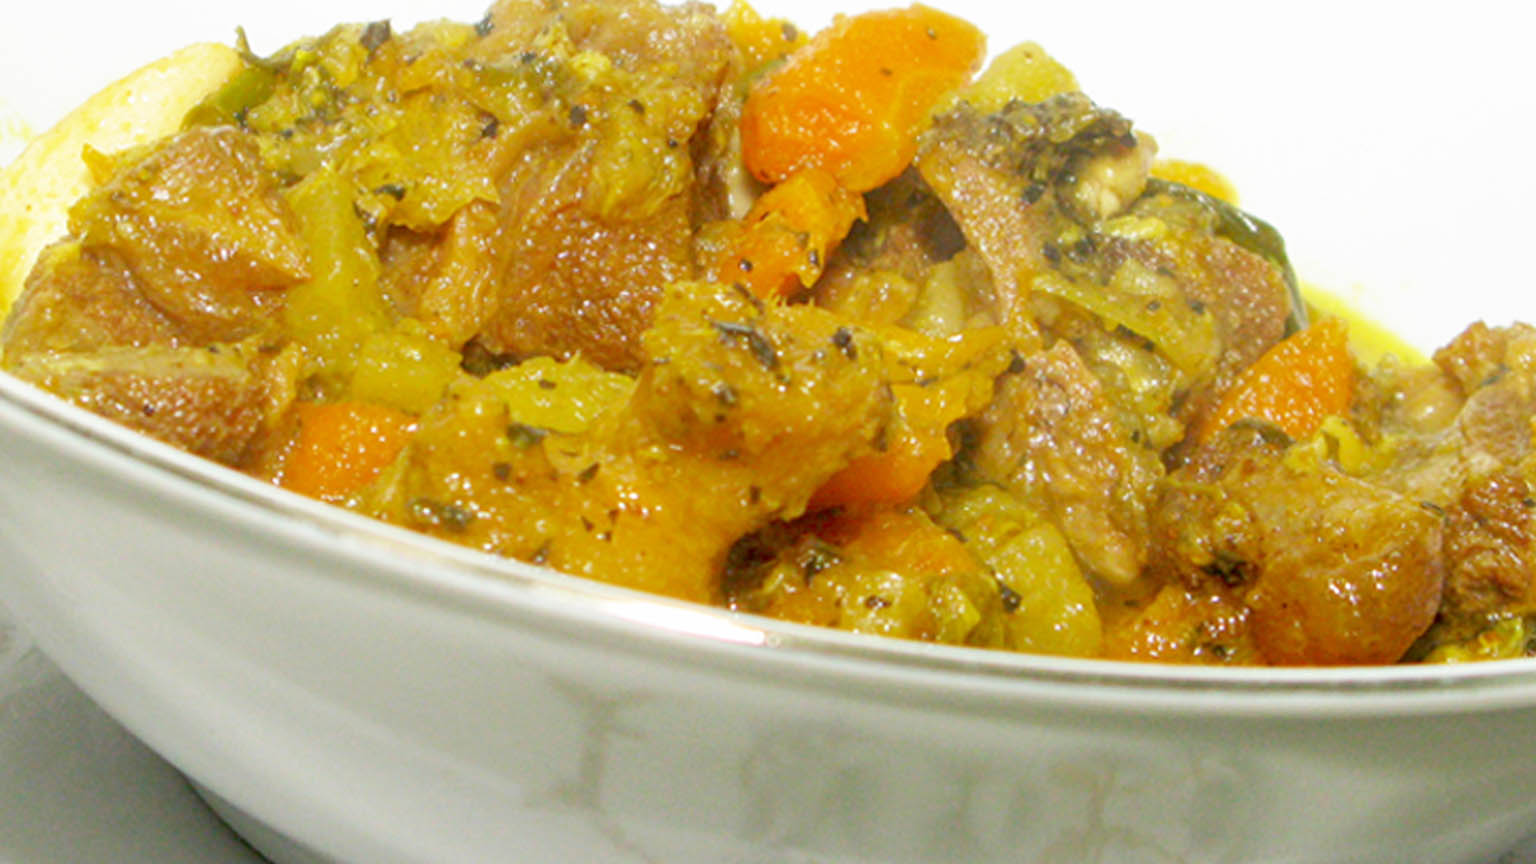 Curry Goat Meat or Mutton Stew